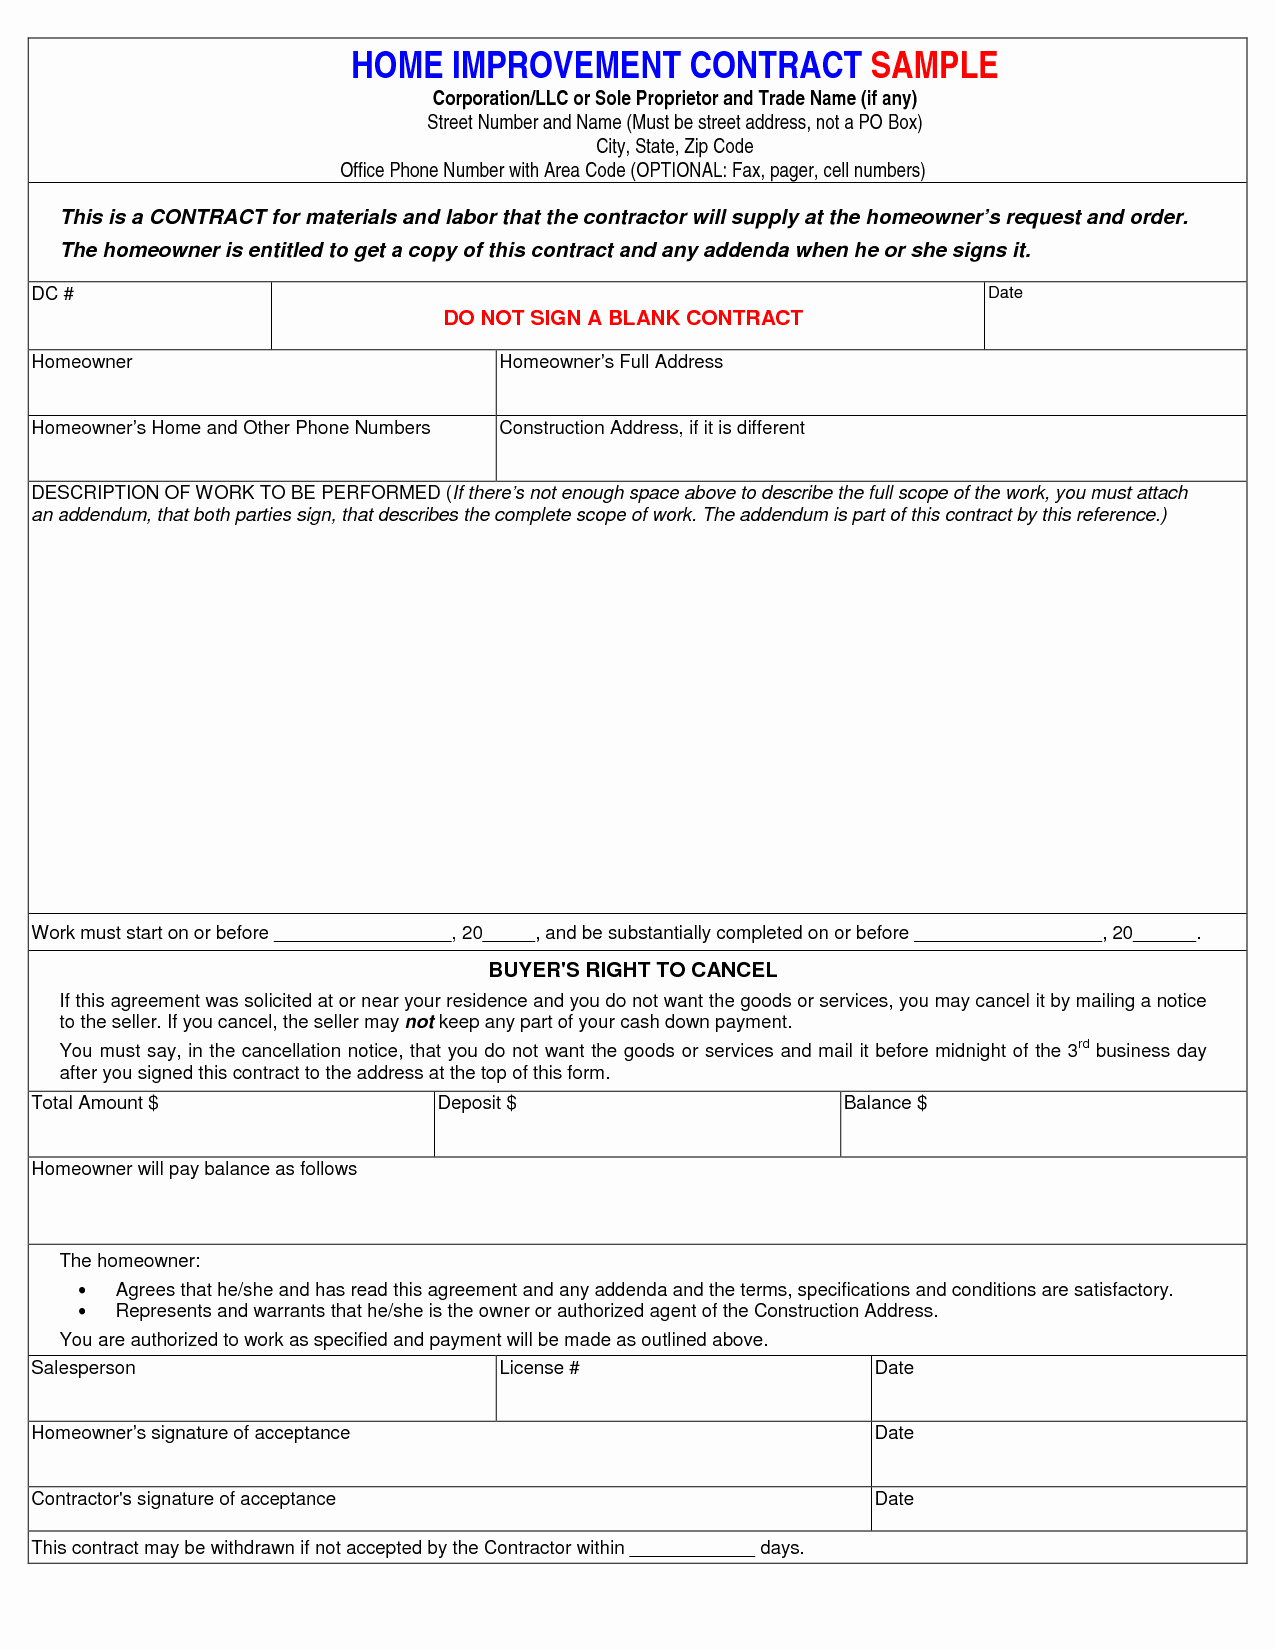 Home Repair Contract Template New Home Improvement Contract Free Printable Documents